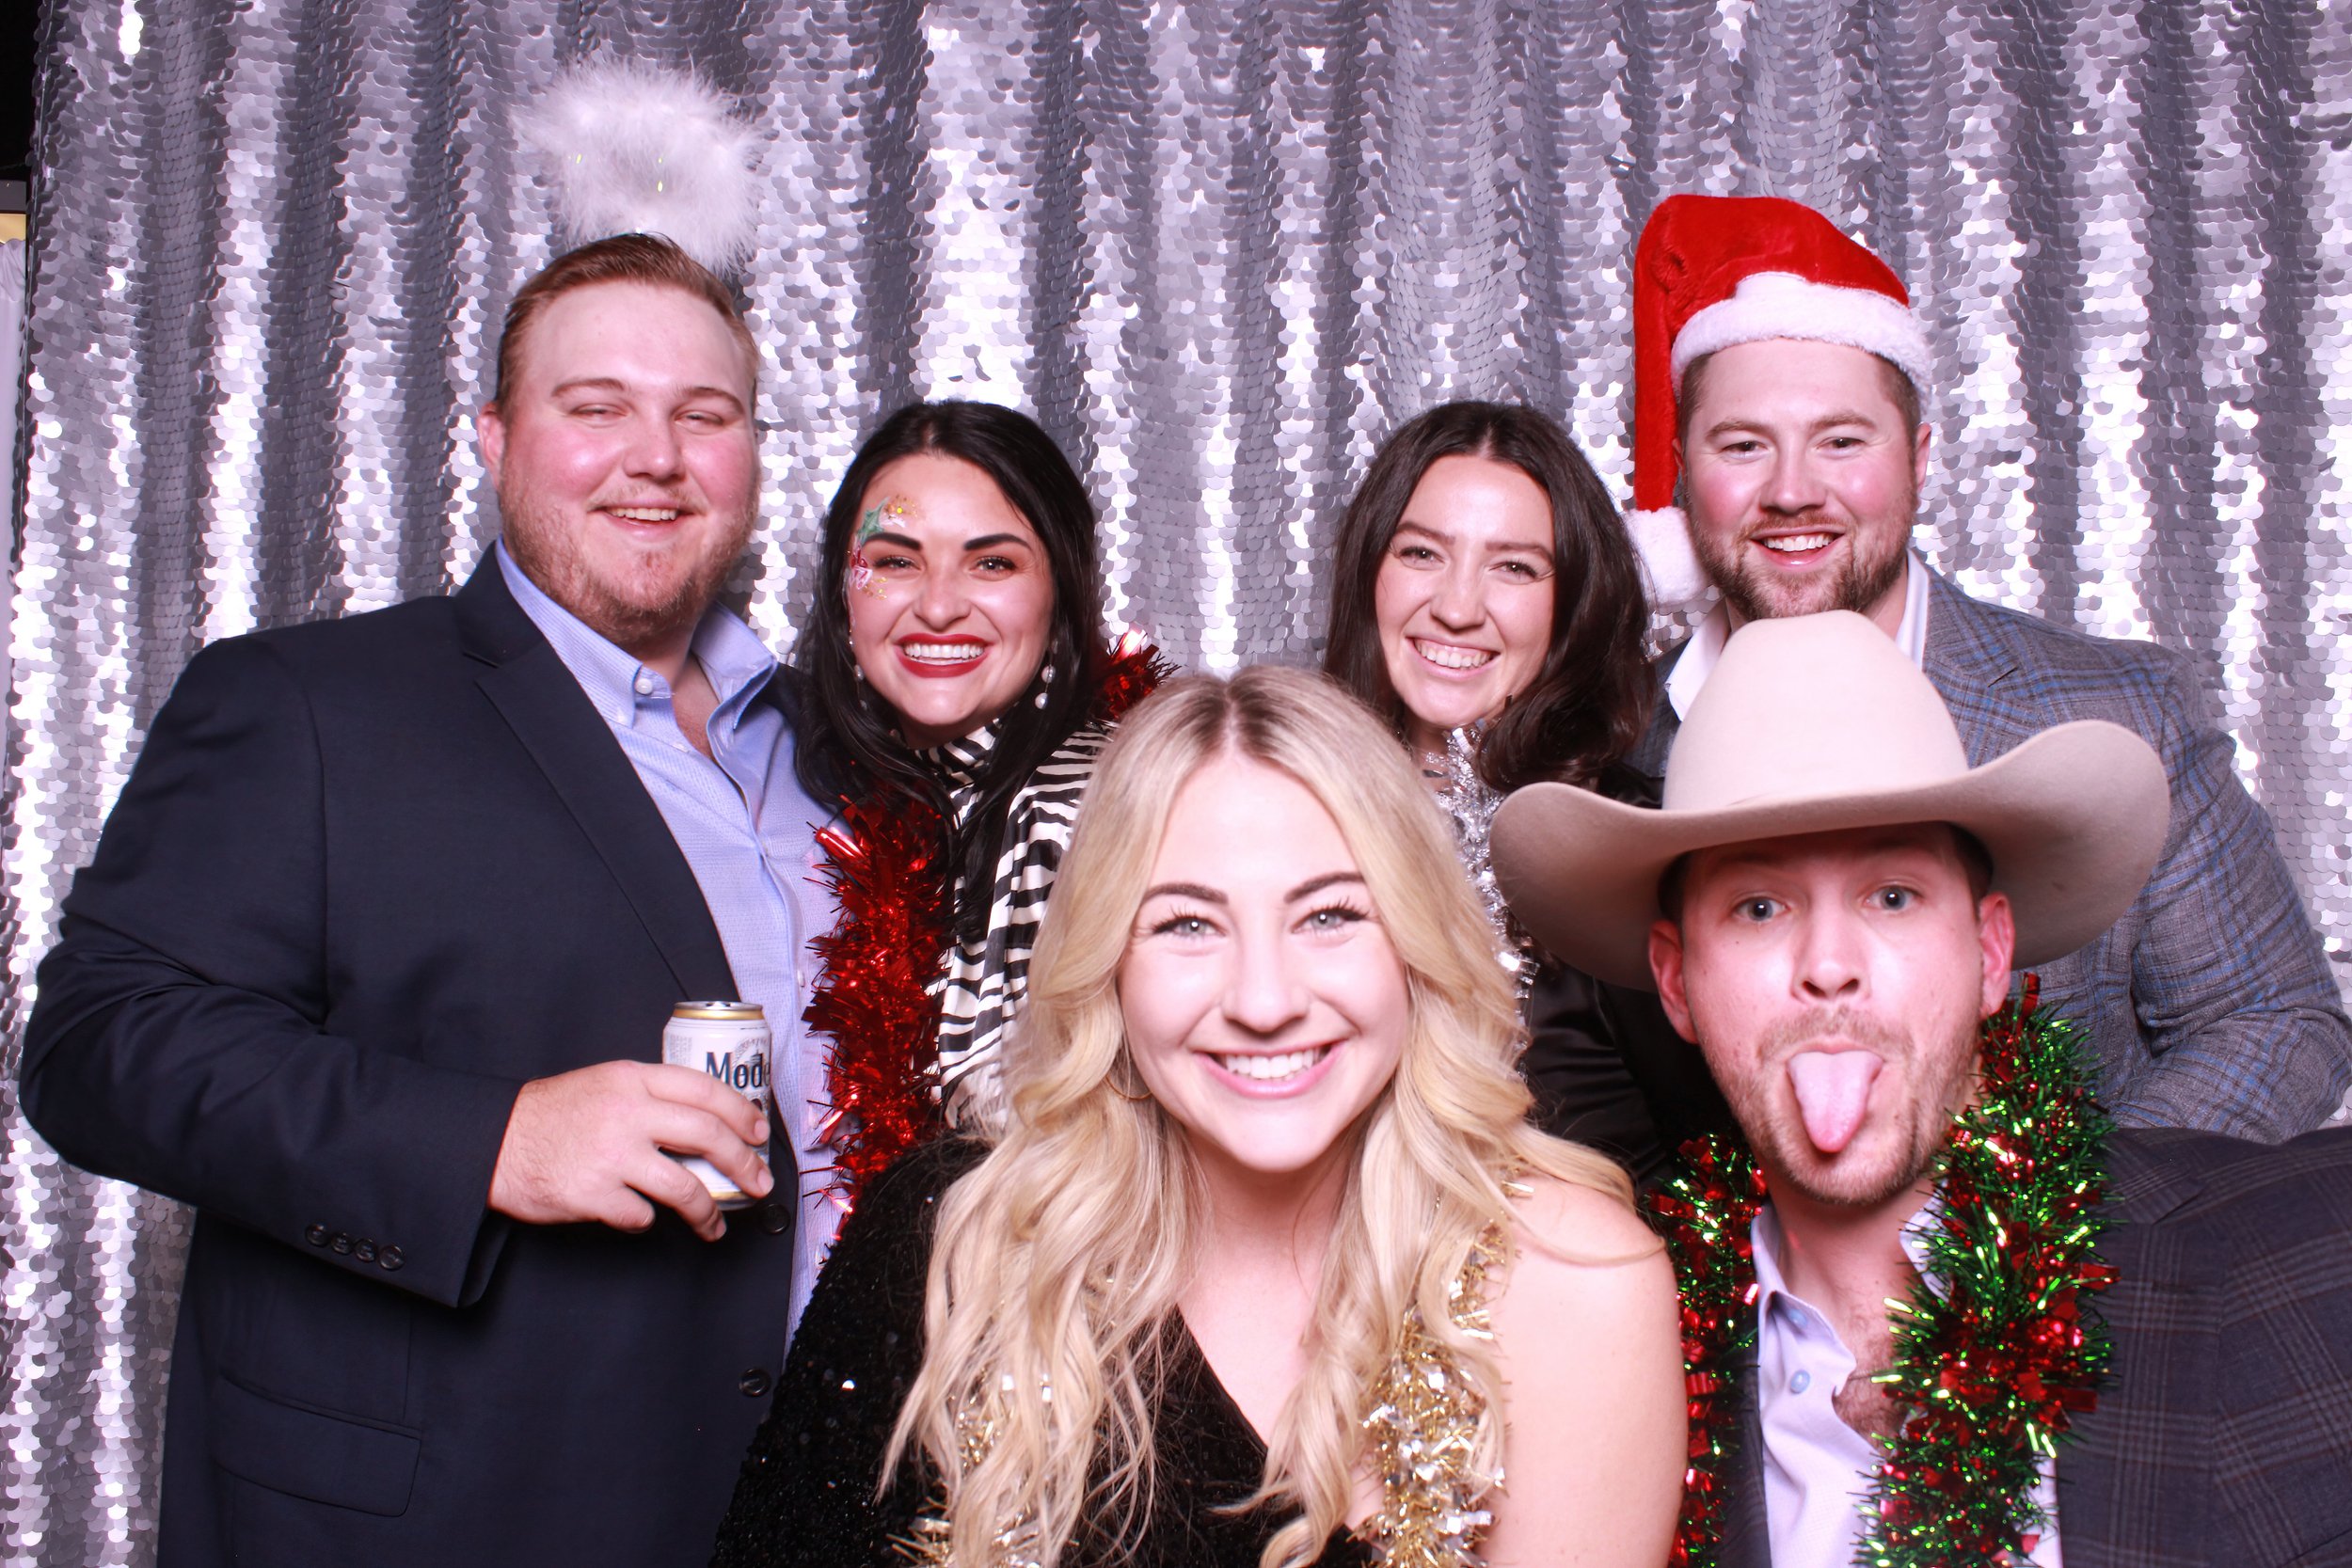 PEERLESS HOLIDAY PARTY